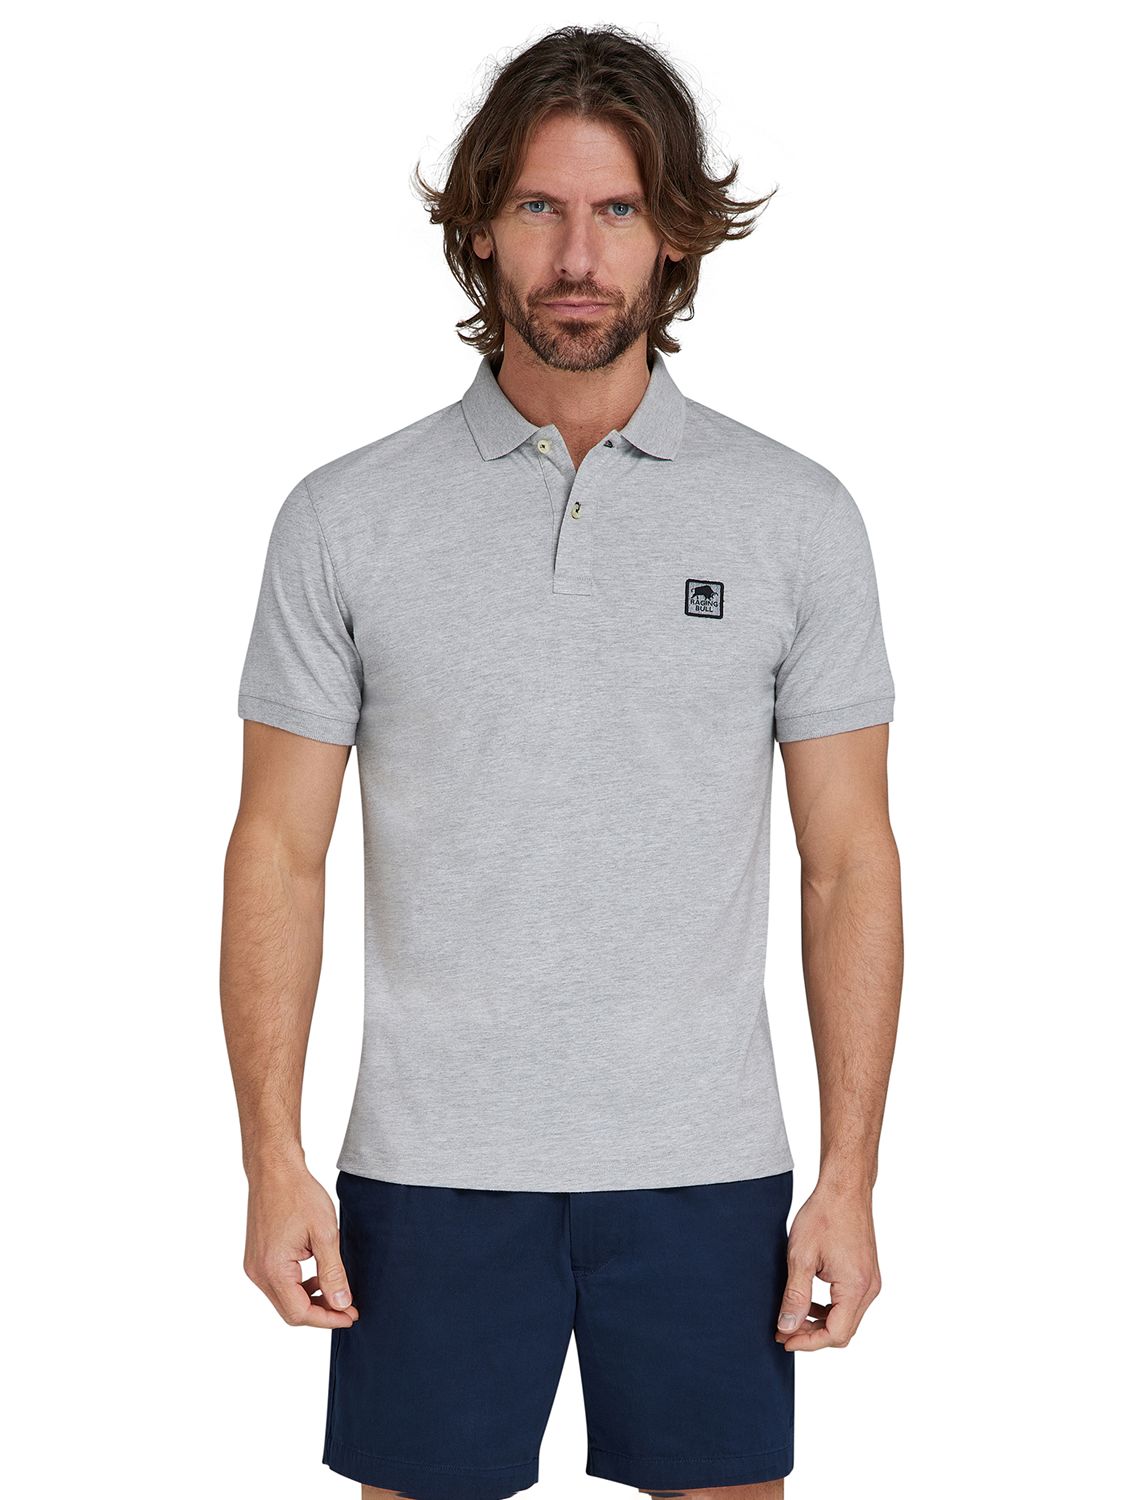 Raging Bull Patch Jersey Polo Shirt, Grey Marl, S